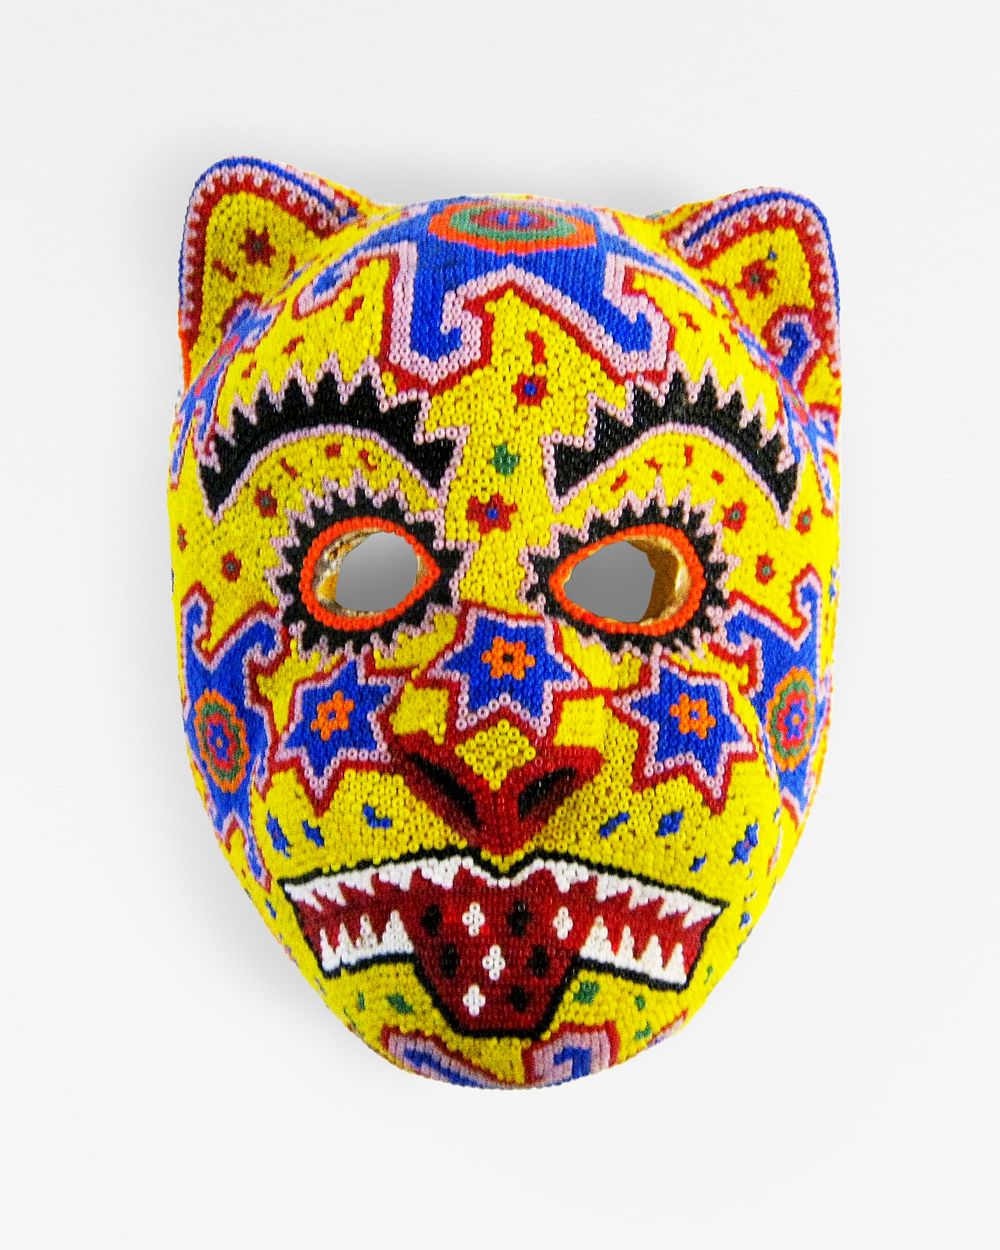 Colorful cat face mask. Original from the Minneapolis Institute of Art.